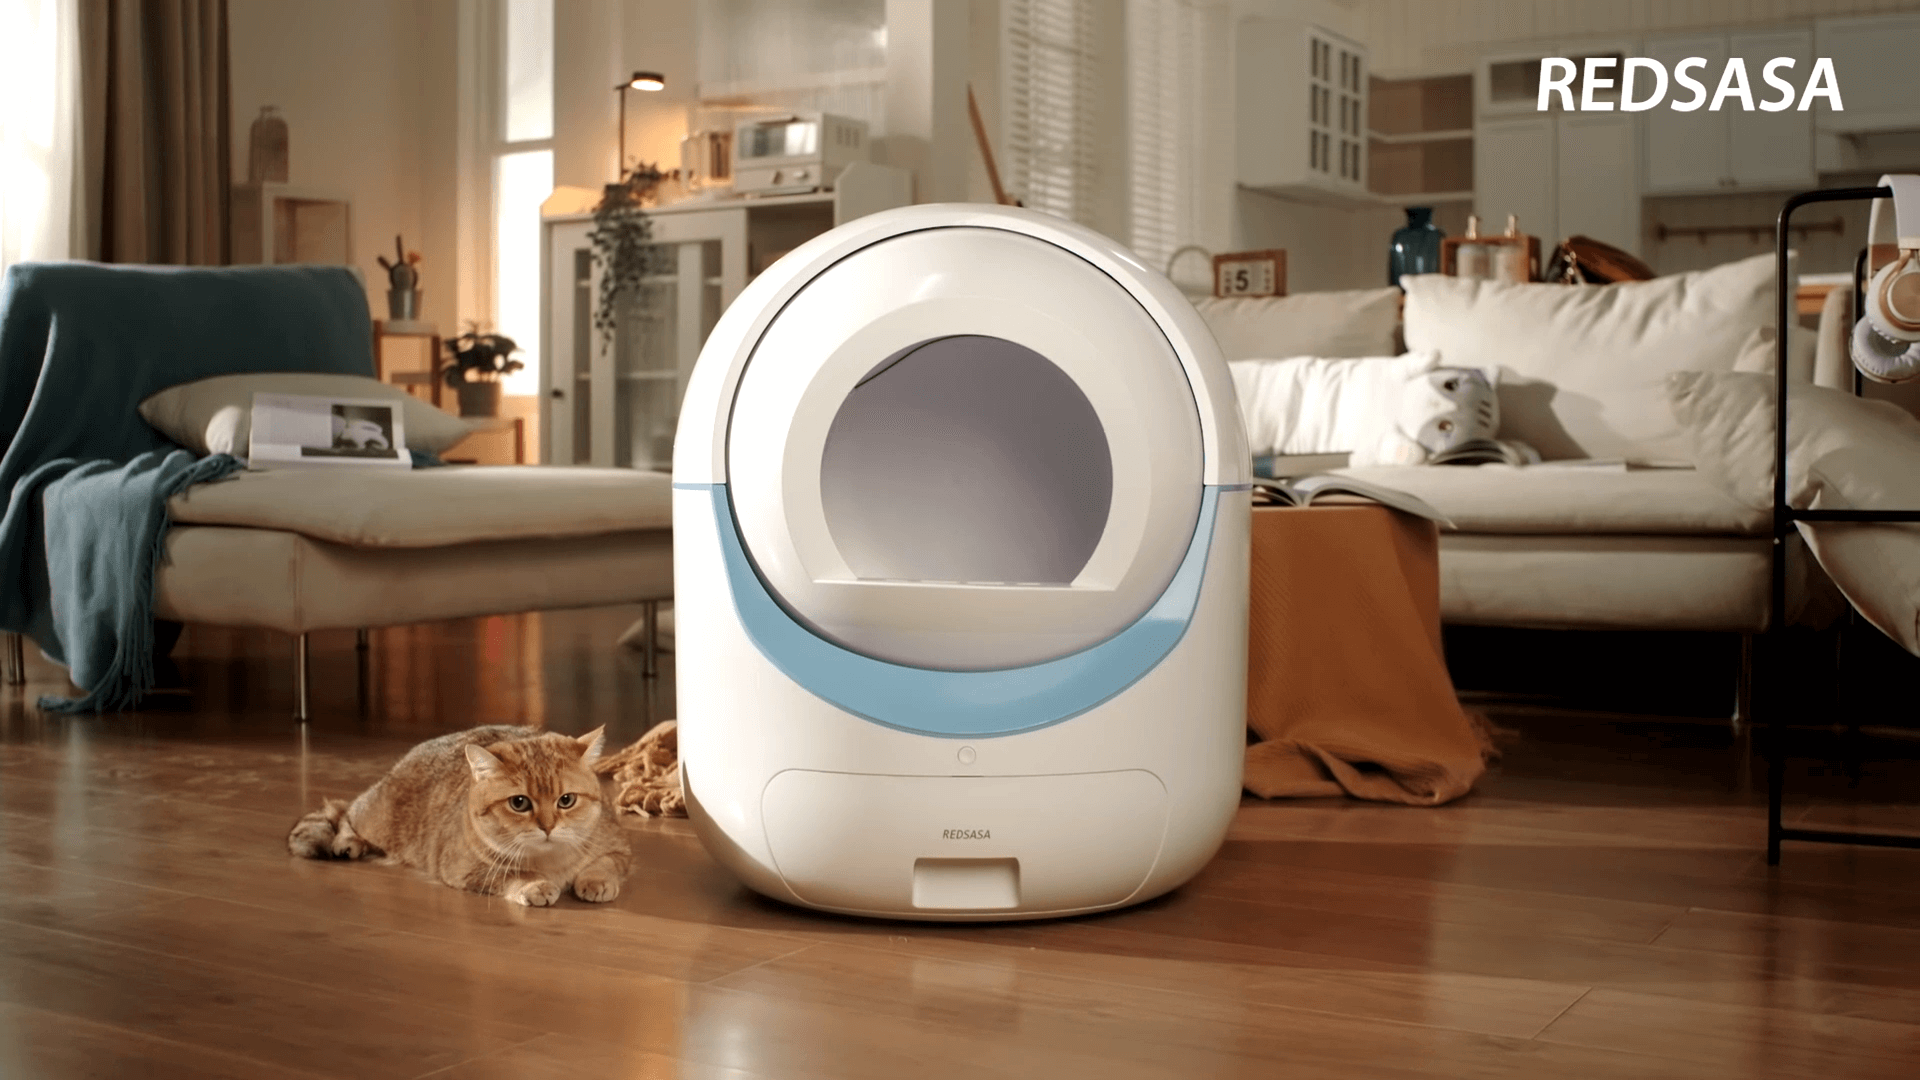 Load video: Discover the REDSASA Automated Litter Box